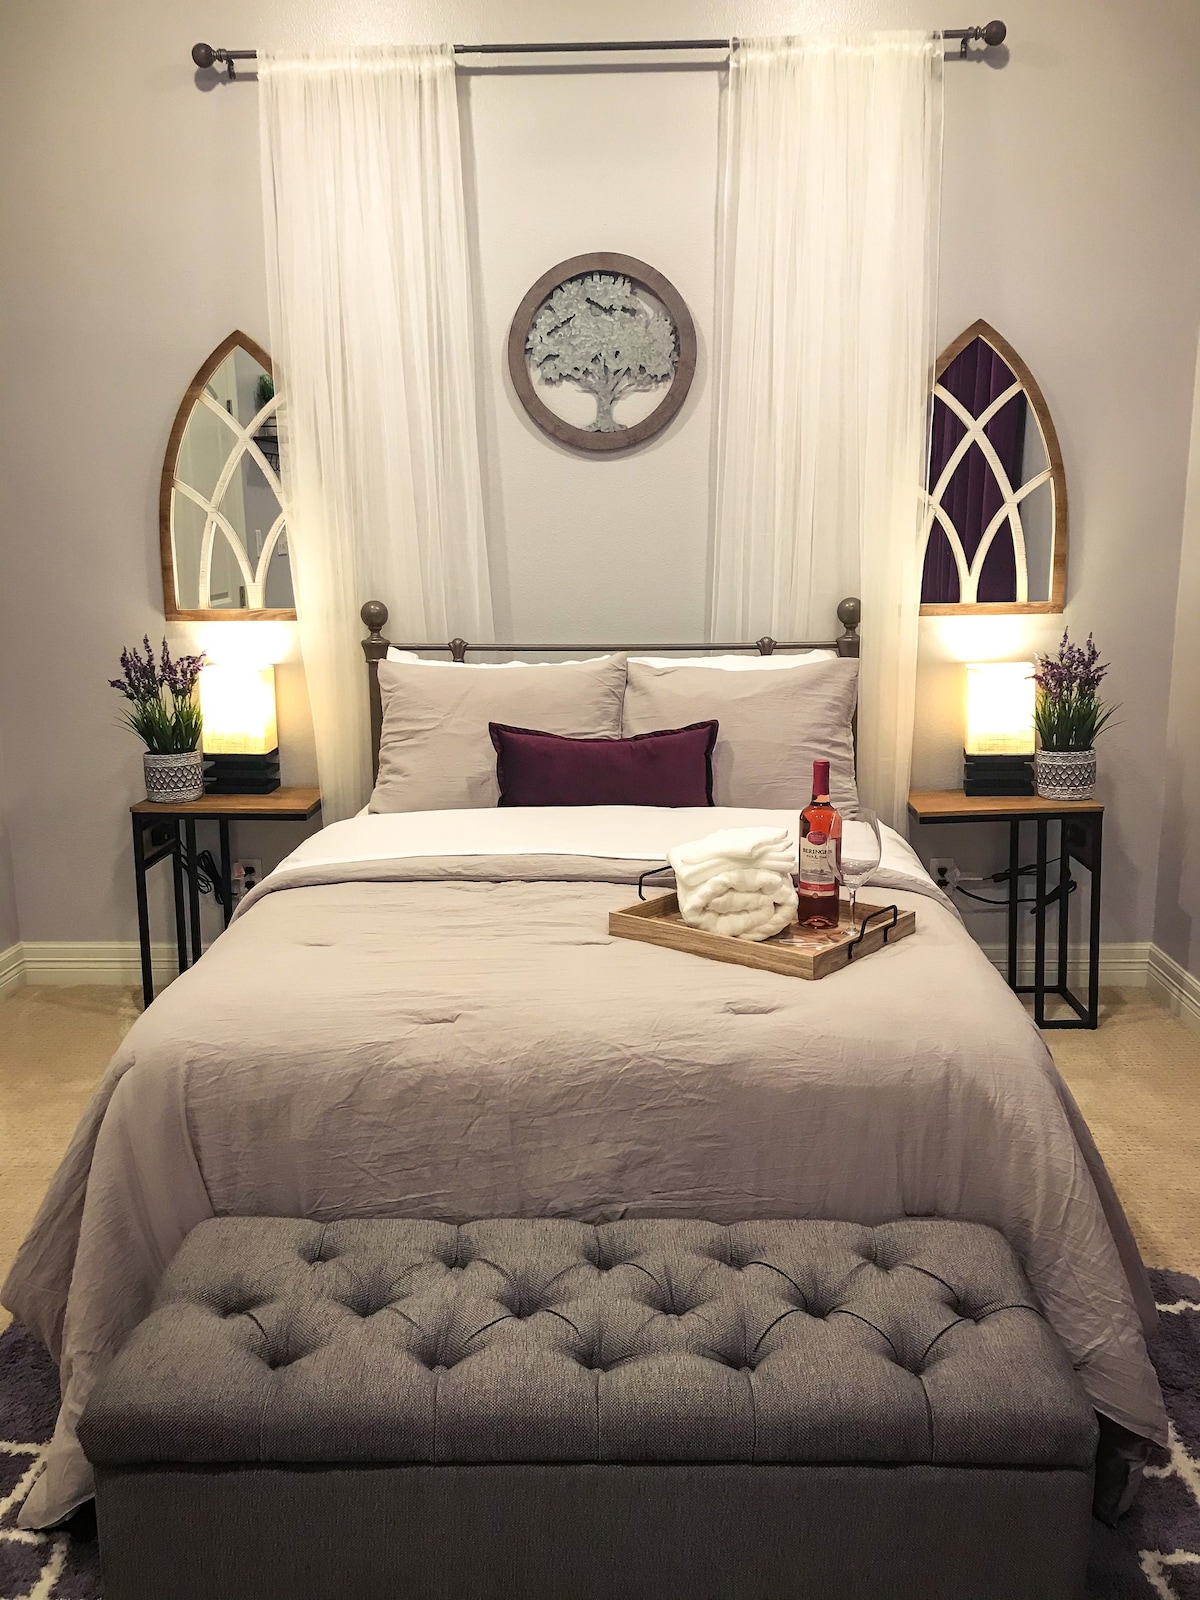 ✵Full Bed Private Room #11✵ A Perfect 5-Star Stay!